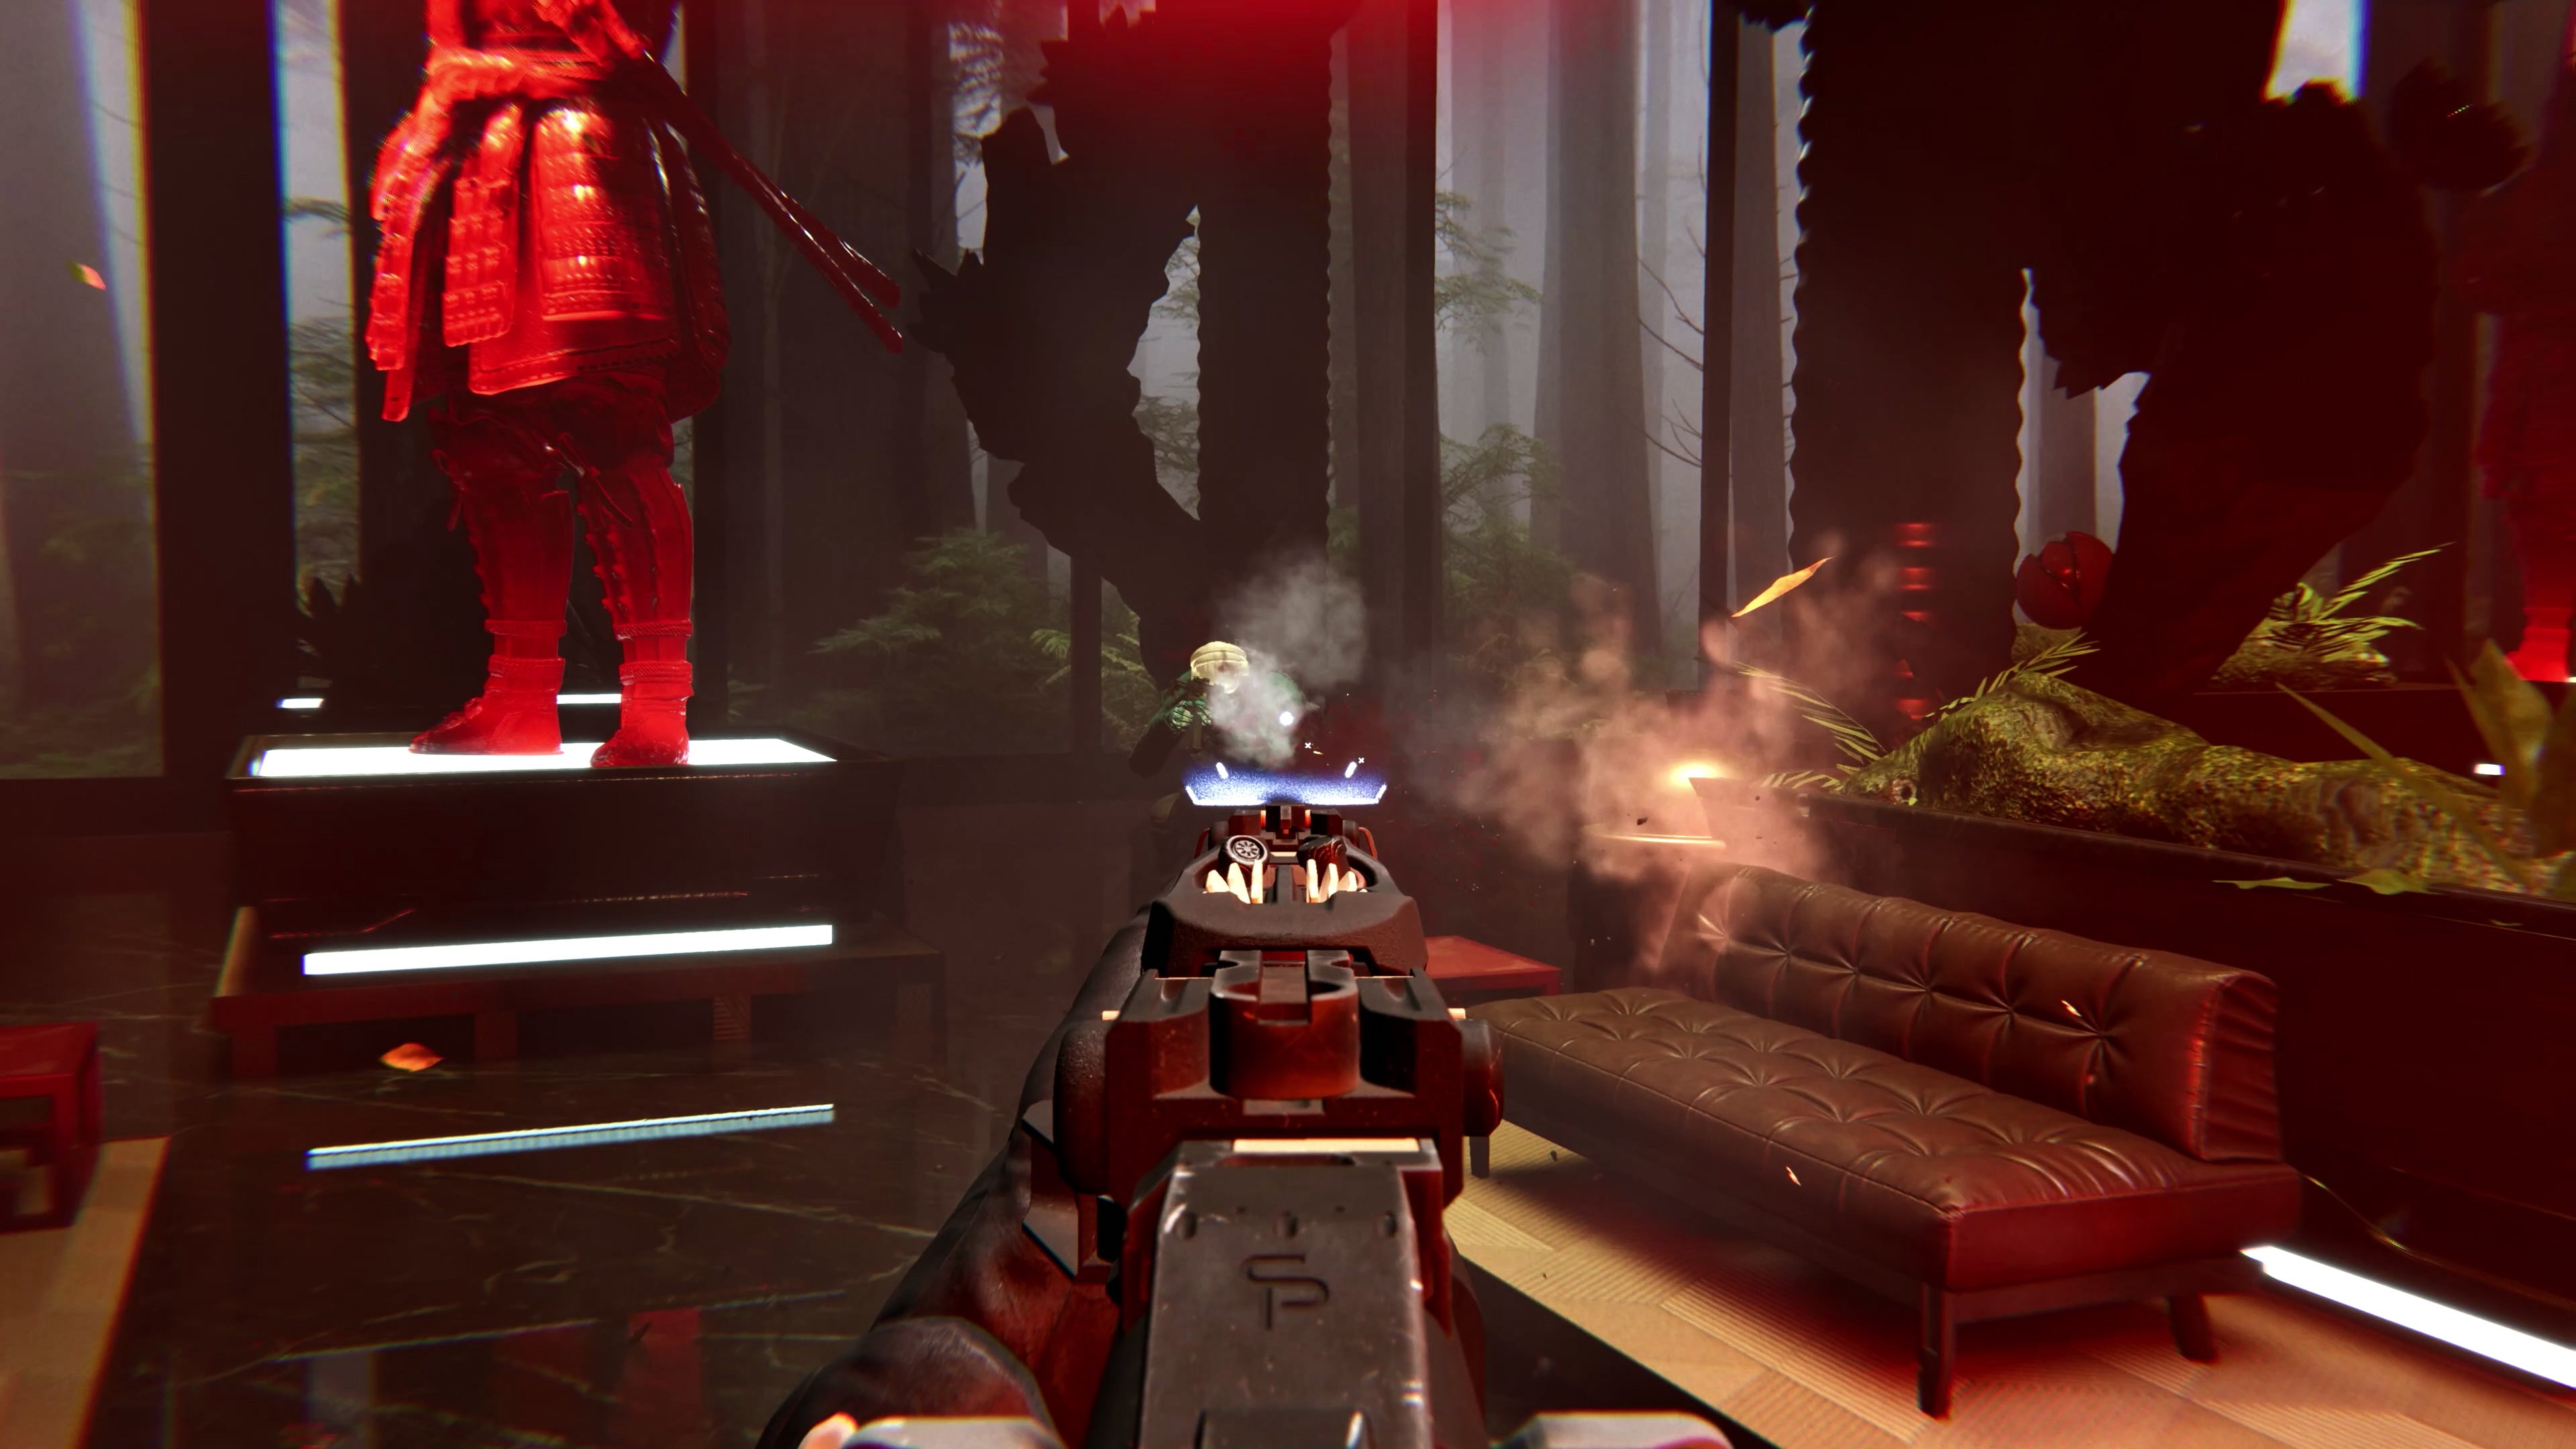 A player with a rifle fires against a combatant in a high-end penthouse with a samurai armor in it.